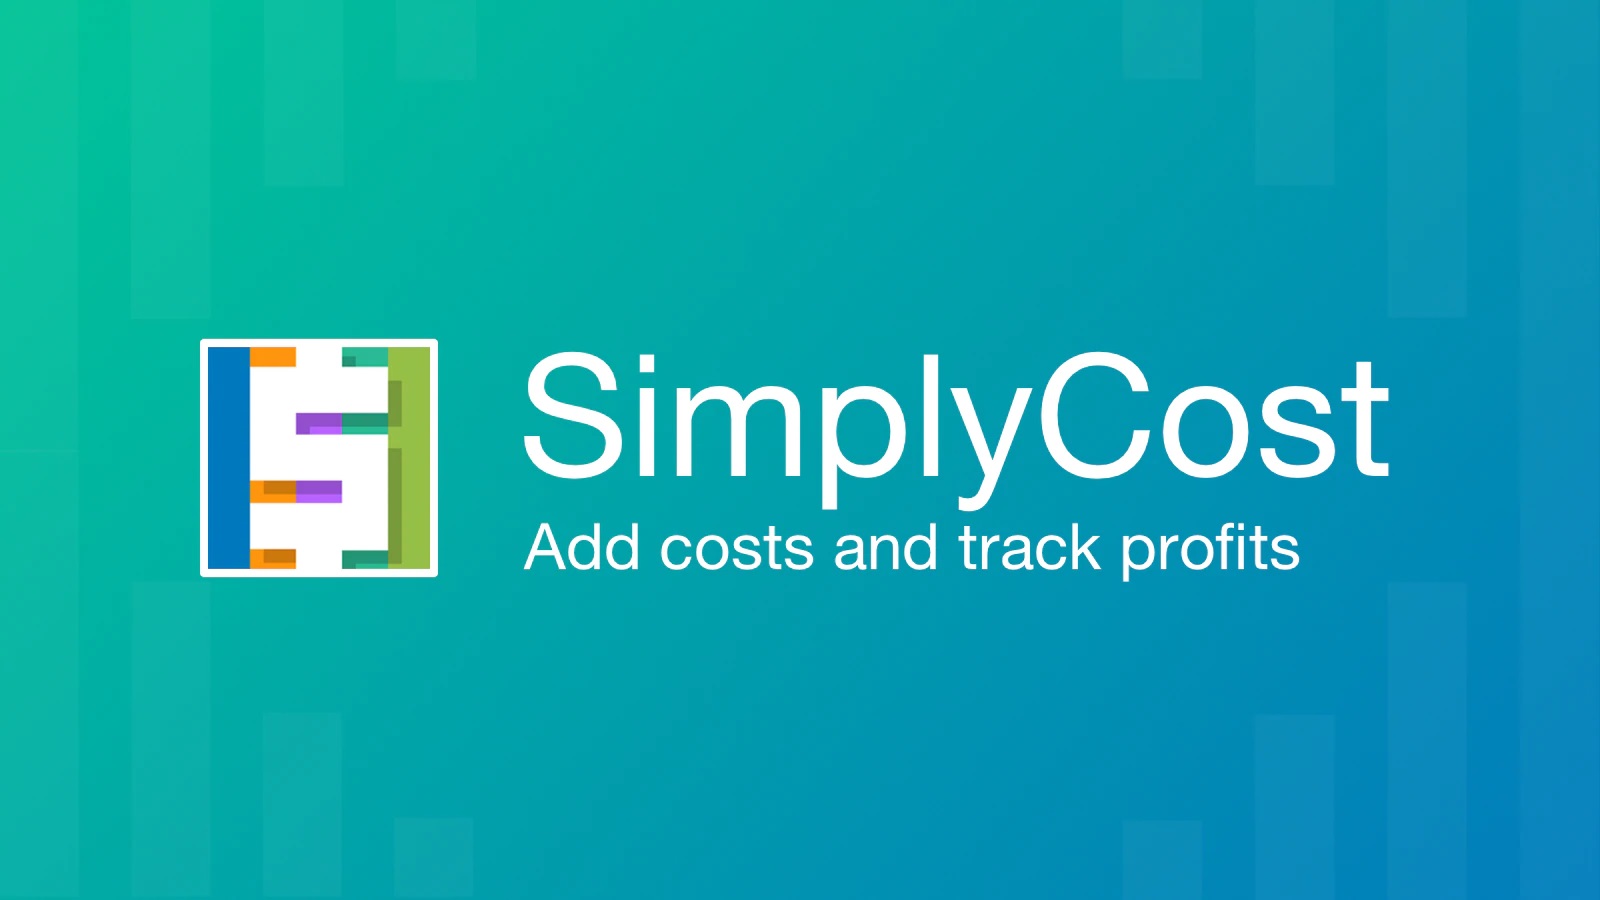 Simplycost